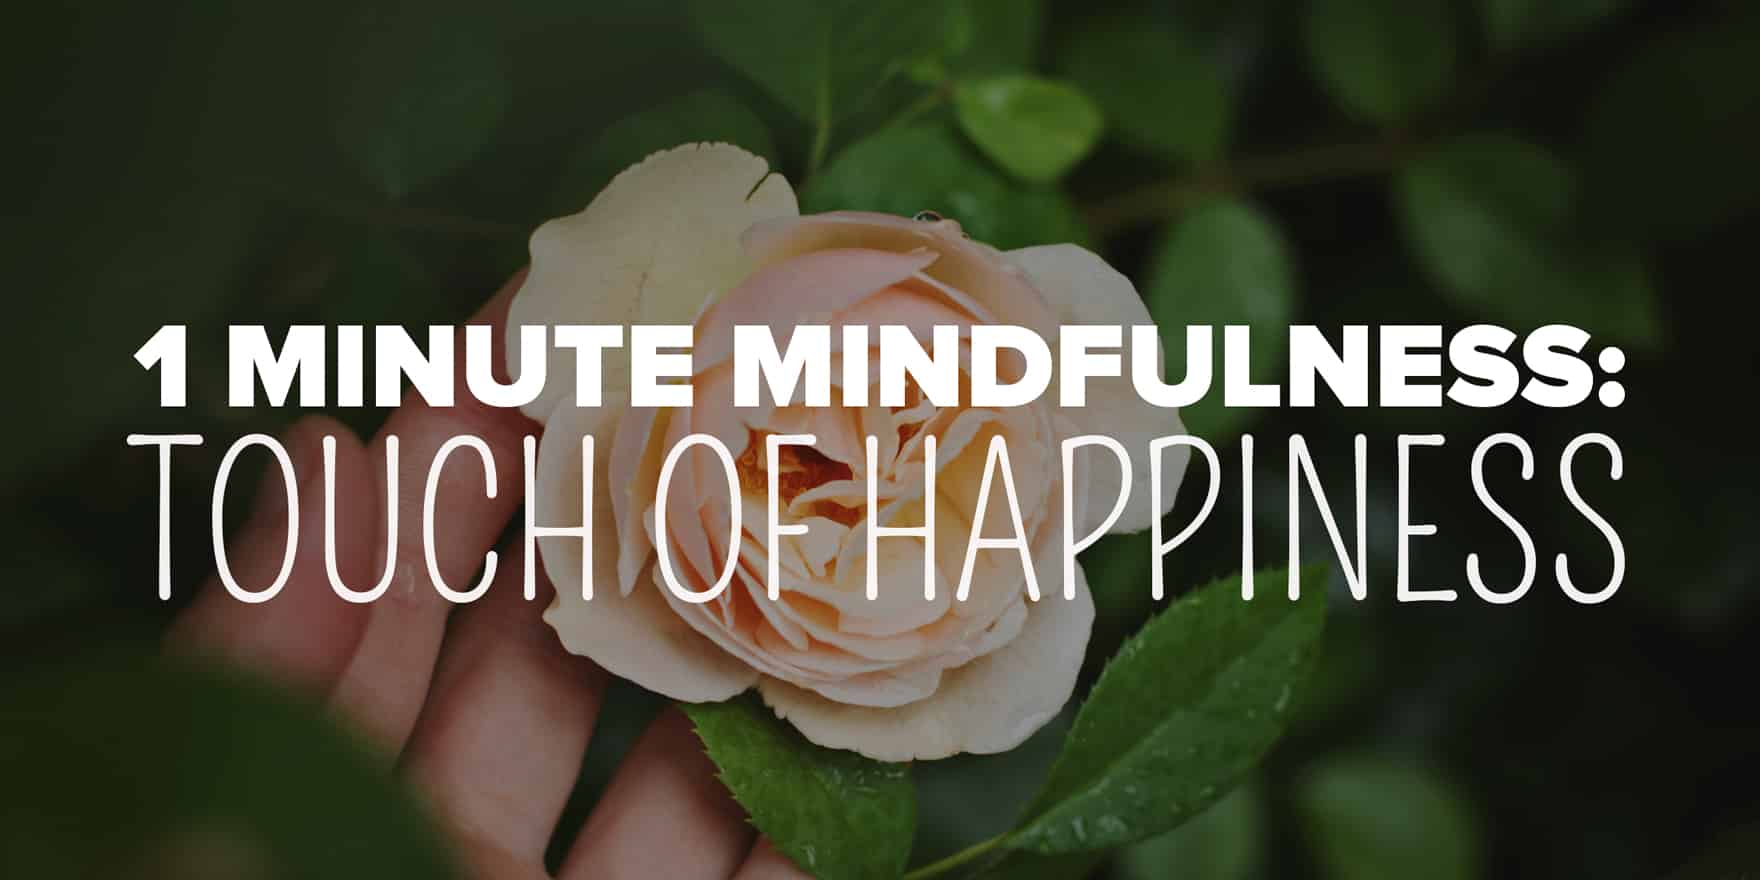 A delicate pale rose amidst lush greenery with the inspiring message: 1 minute mindfulness: touch of happiness for your spiritual journey.